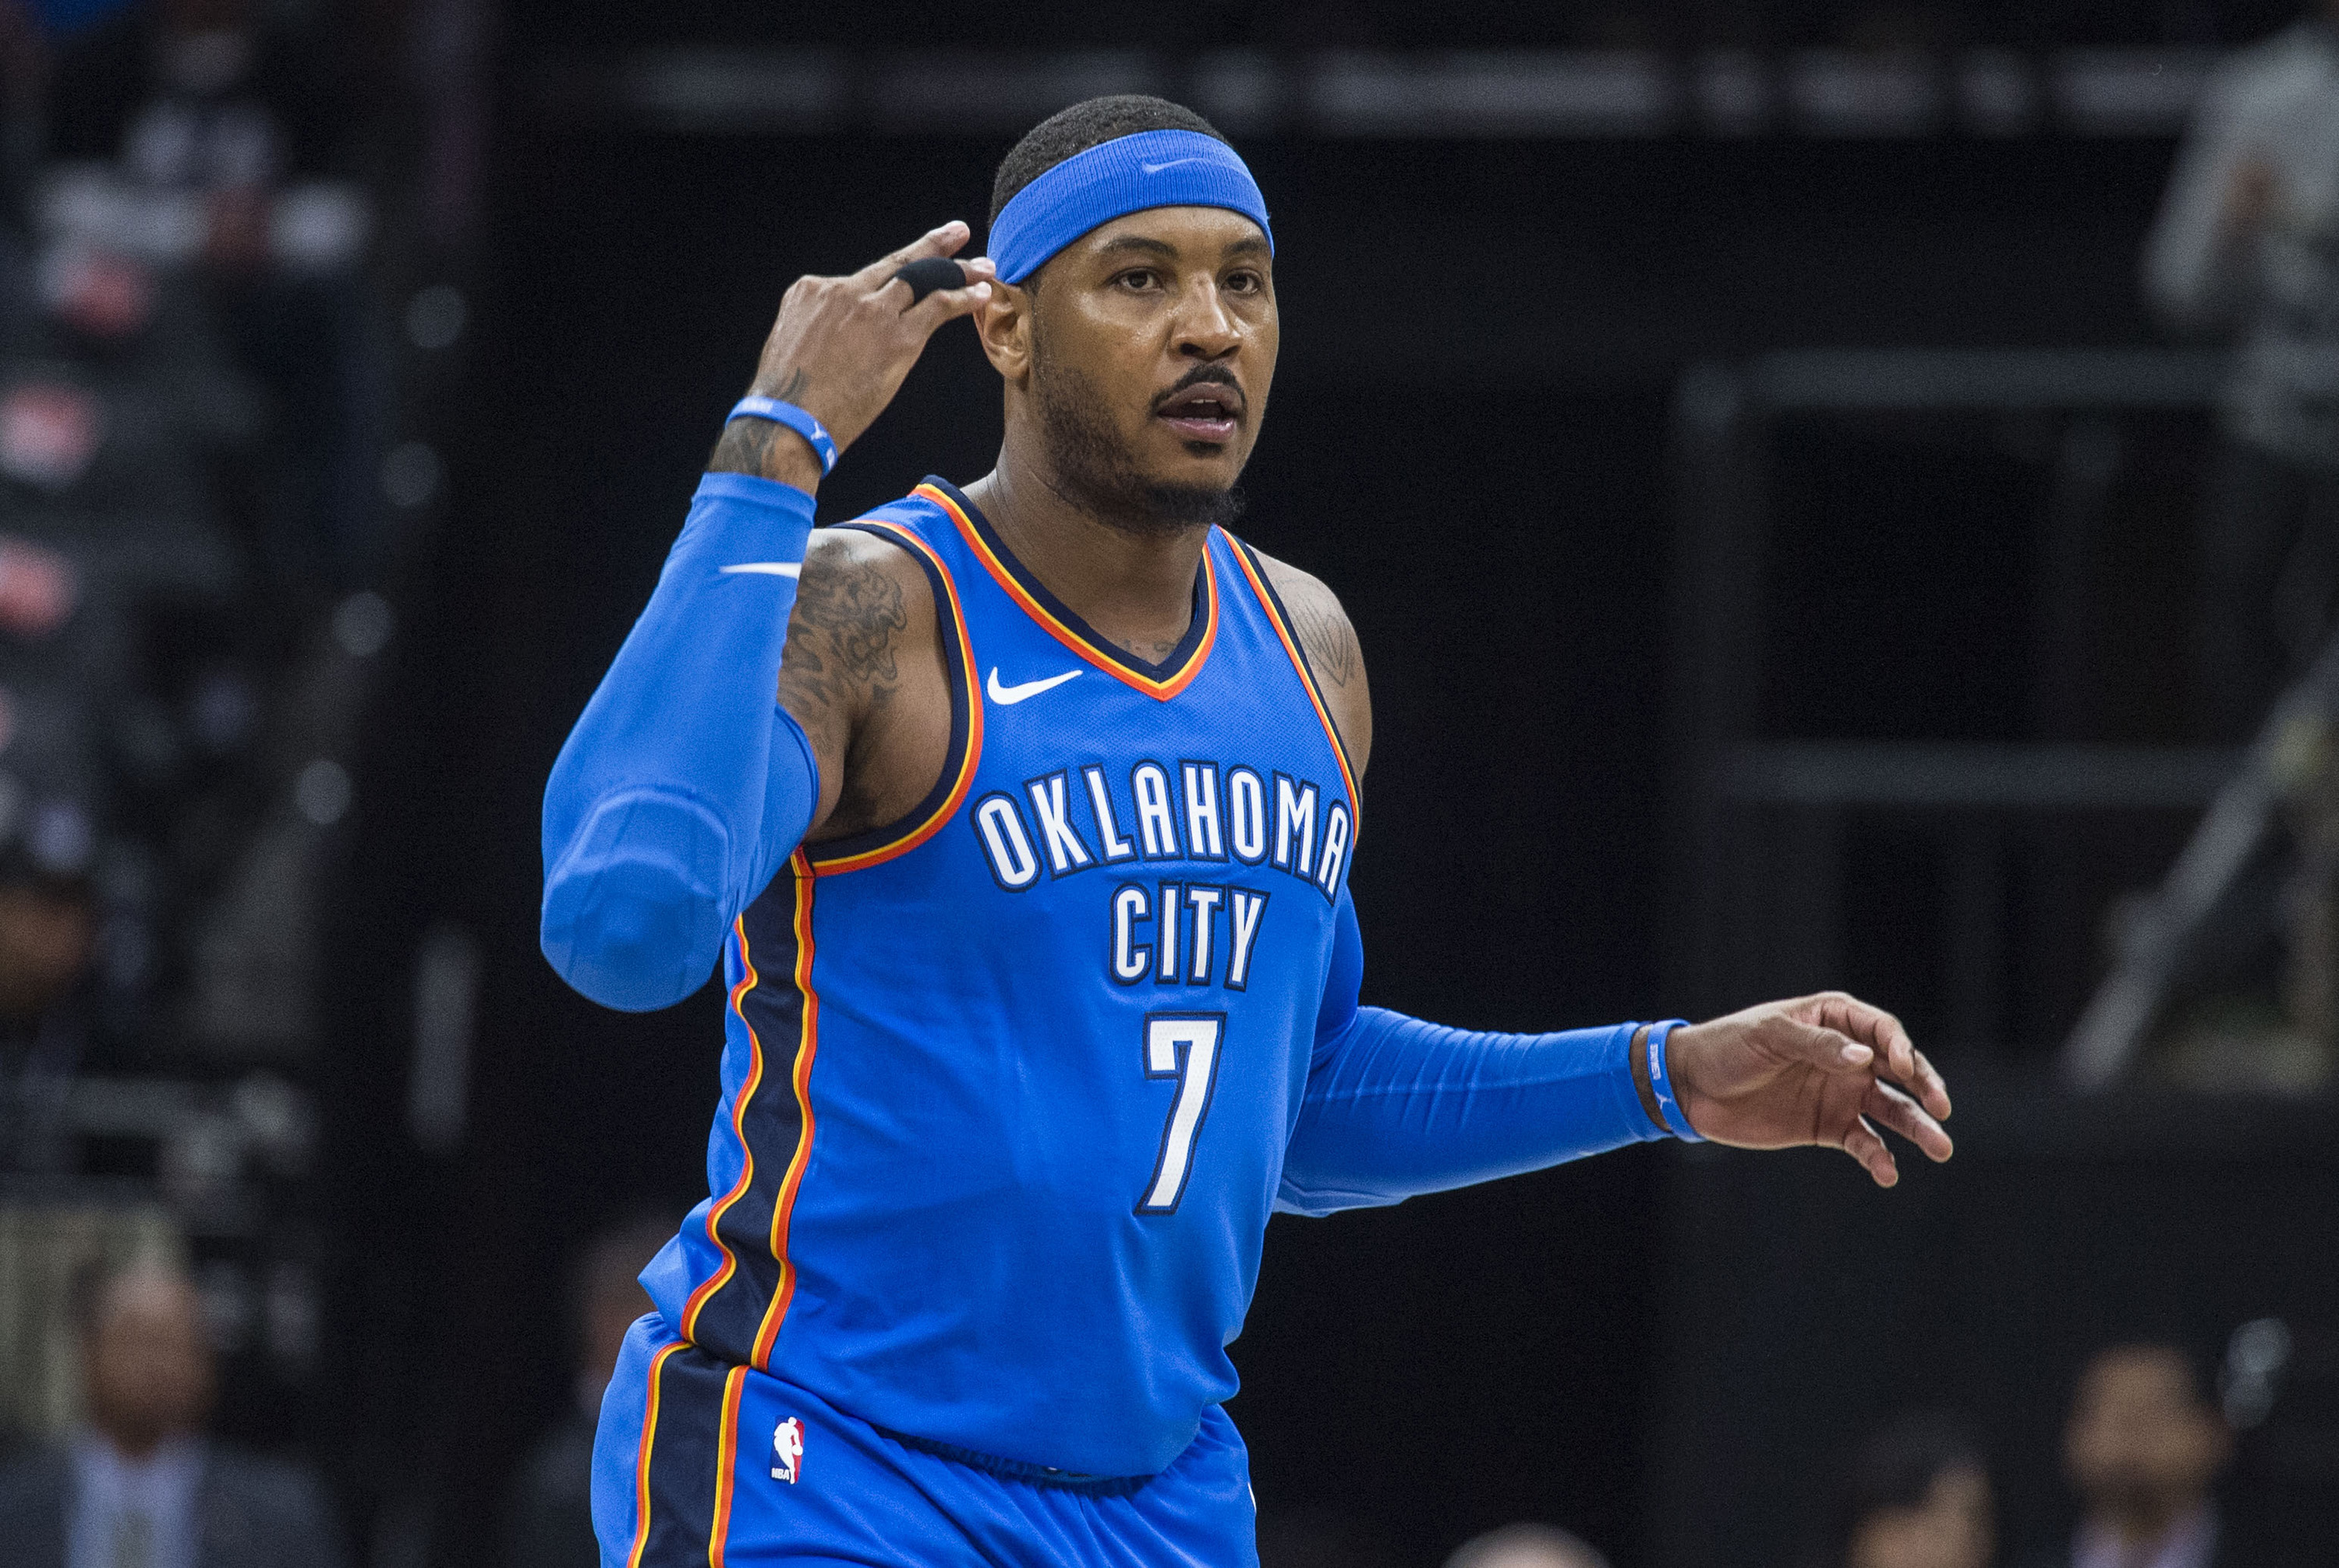 SportsCenter - The Thunder have agreed to trade Carmelo Anthony and a  protected 2022 first-round pick to the Hawks for Dennis Schroder and Mike  Muscala. The Hawks will then waive Anthony, and